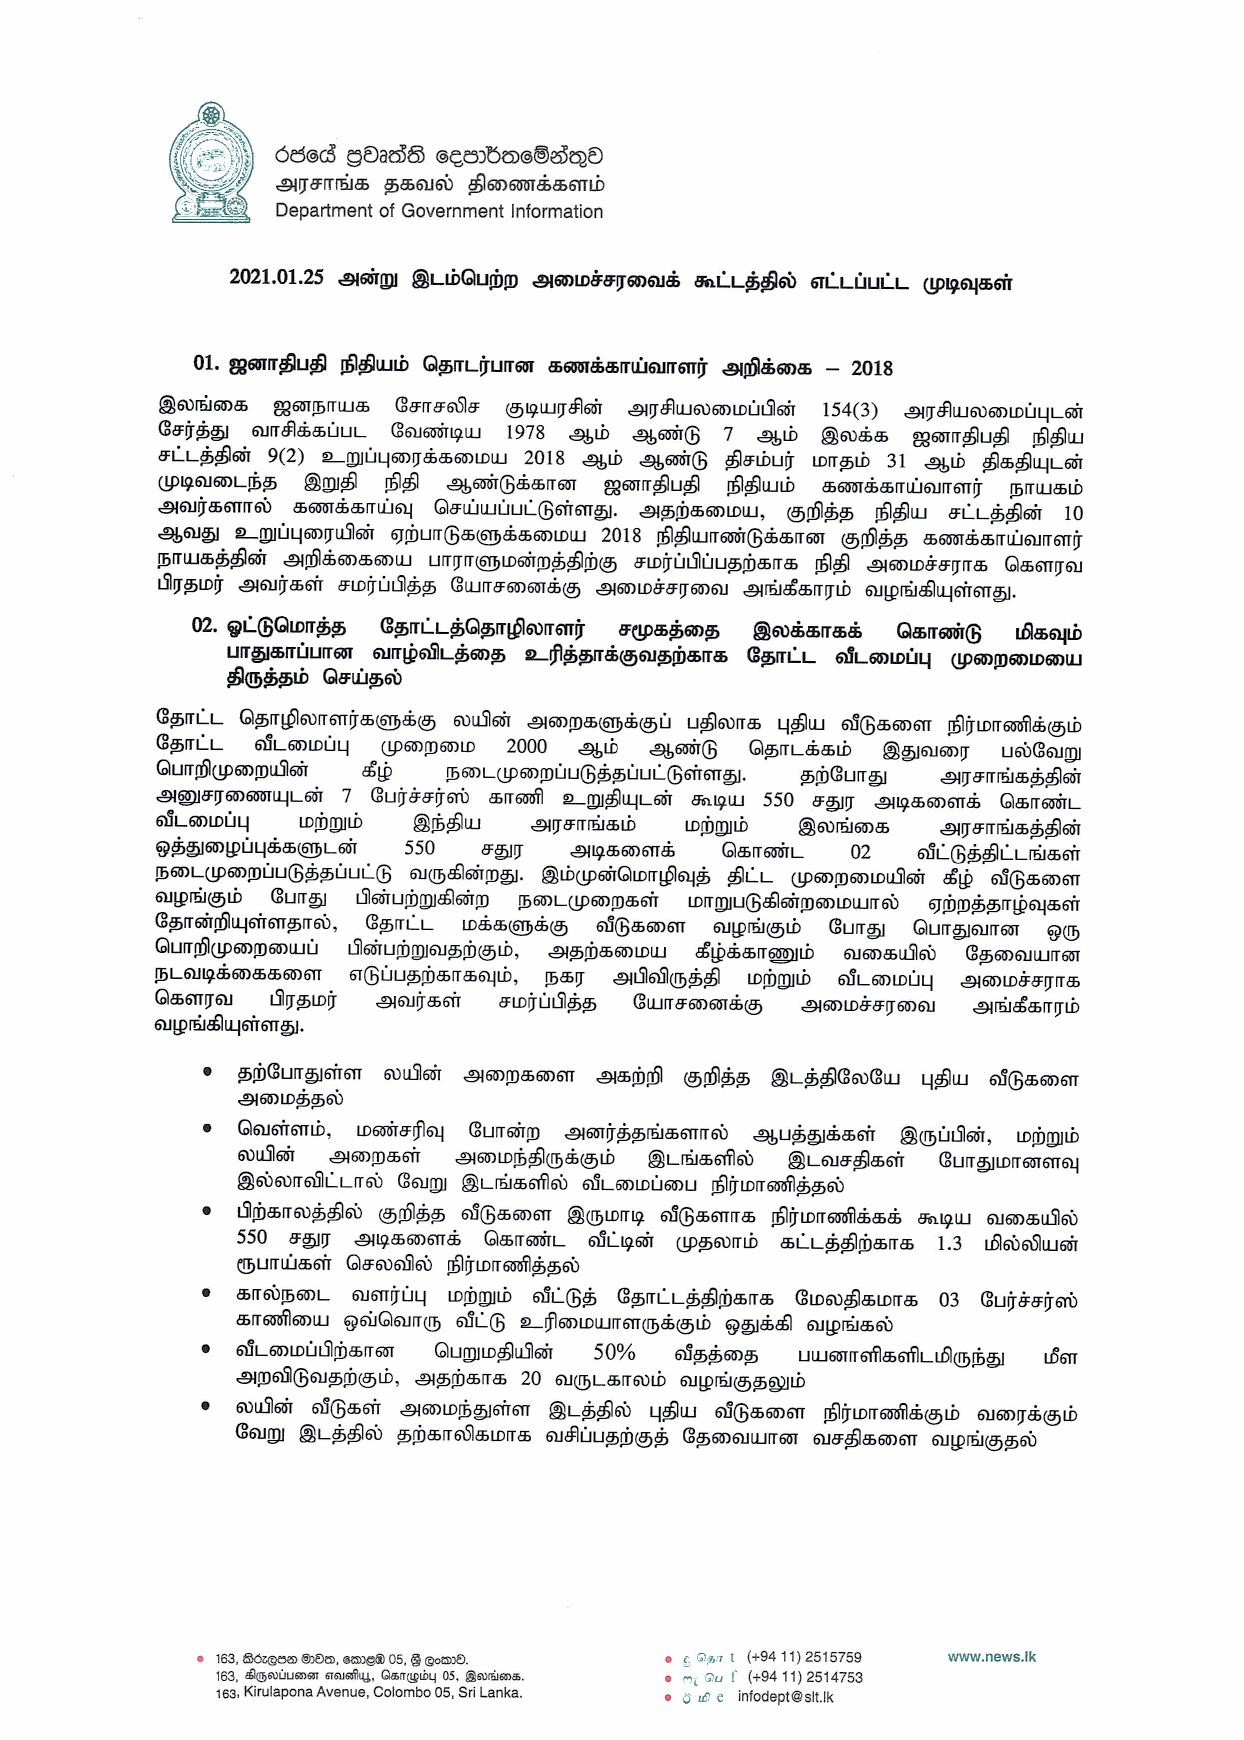 Cabinet Decision on 25.01.2021 Tamil page 001